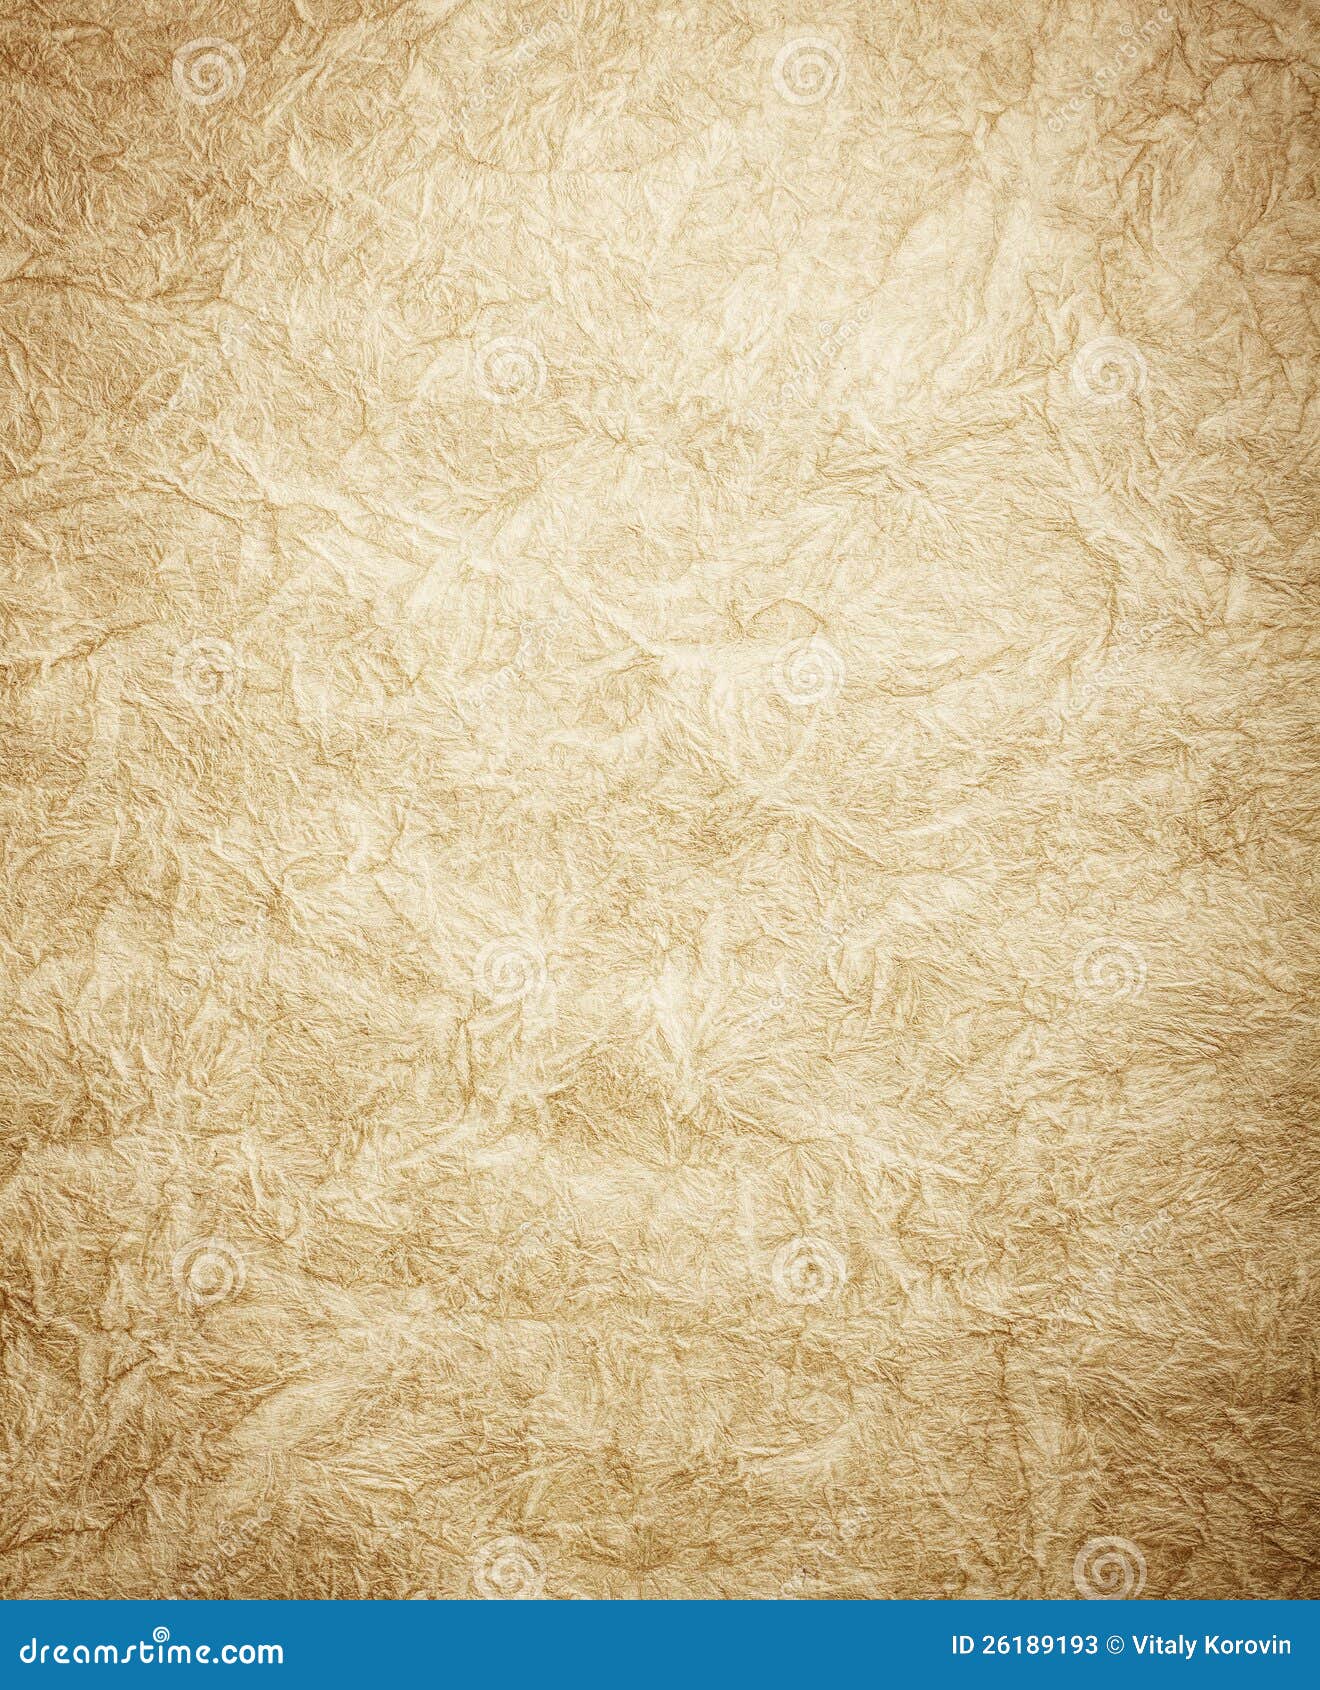 faded gold textured surface